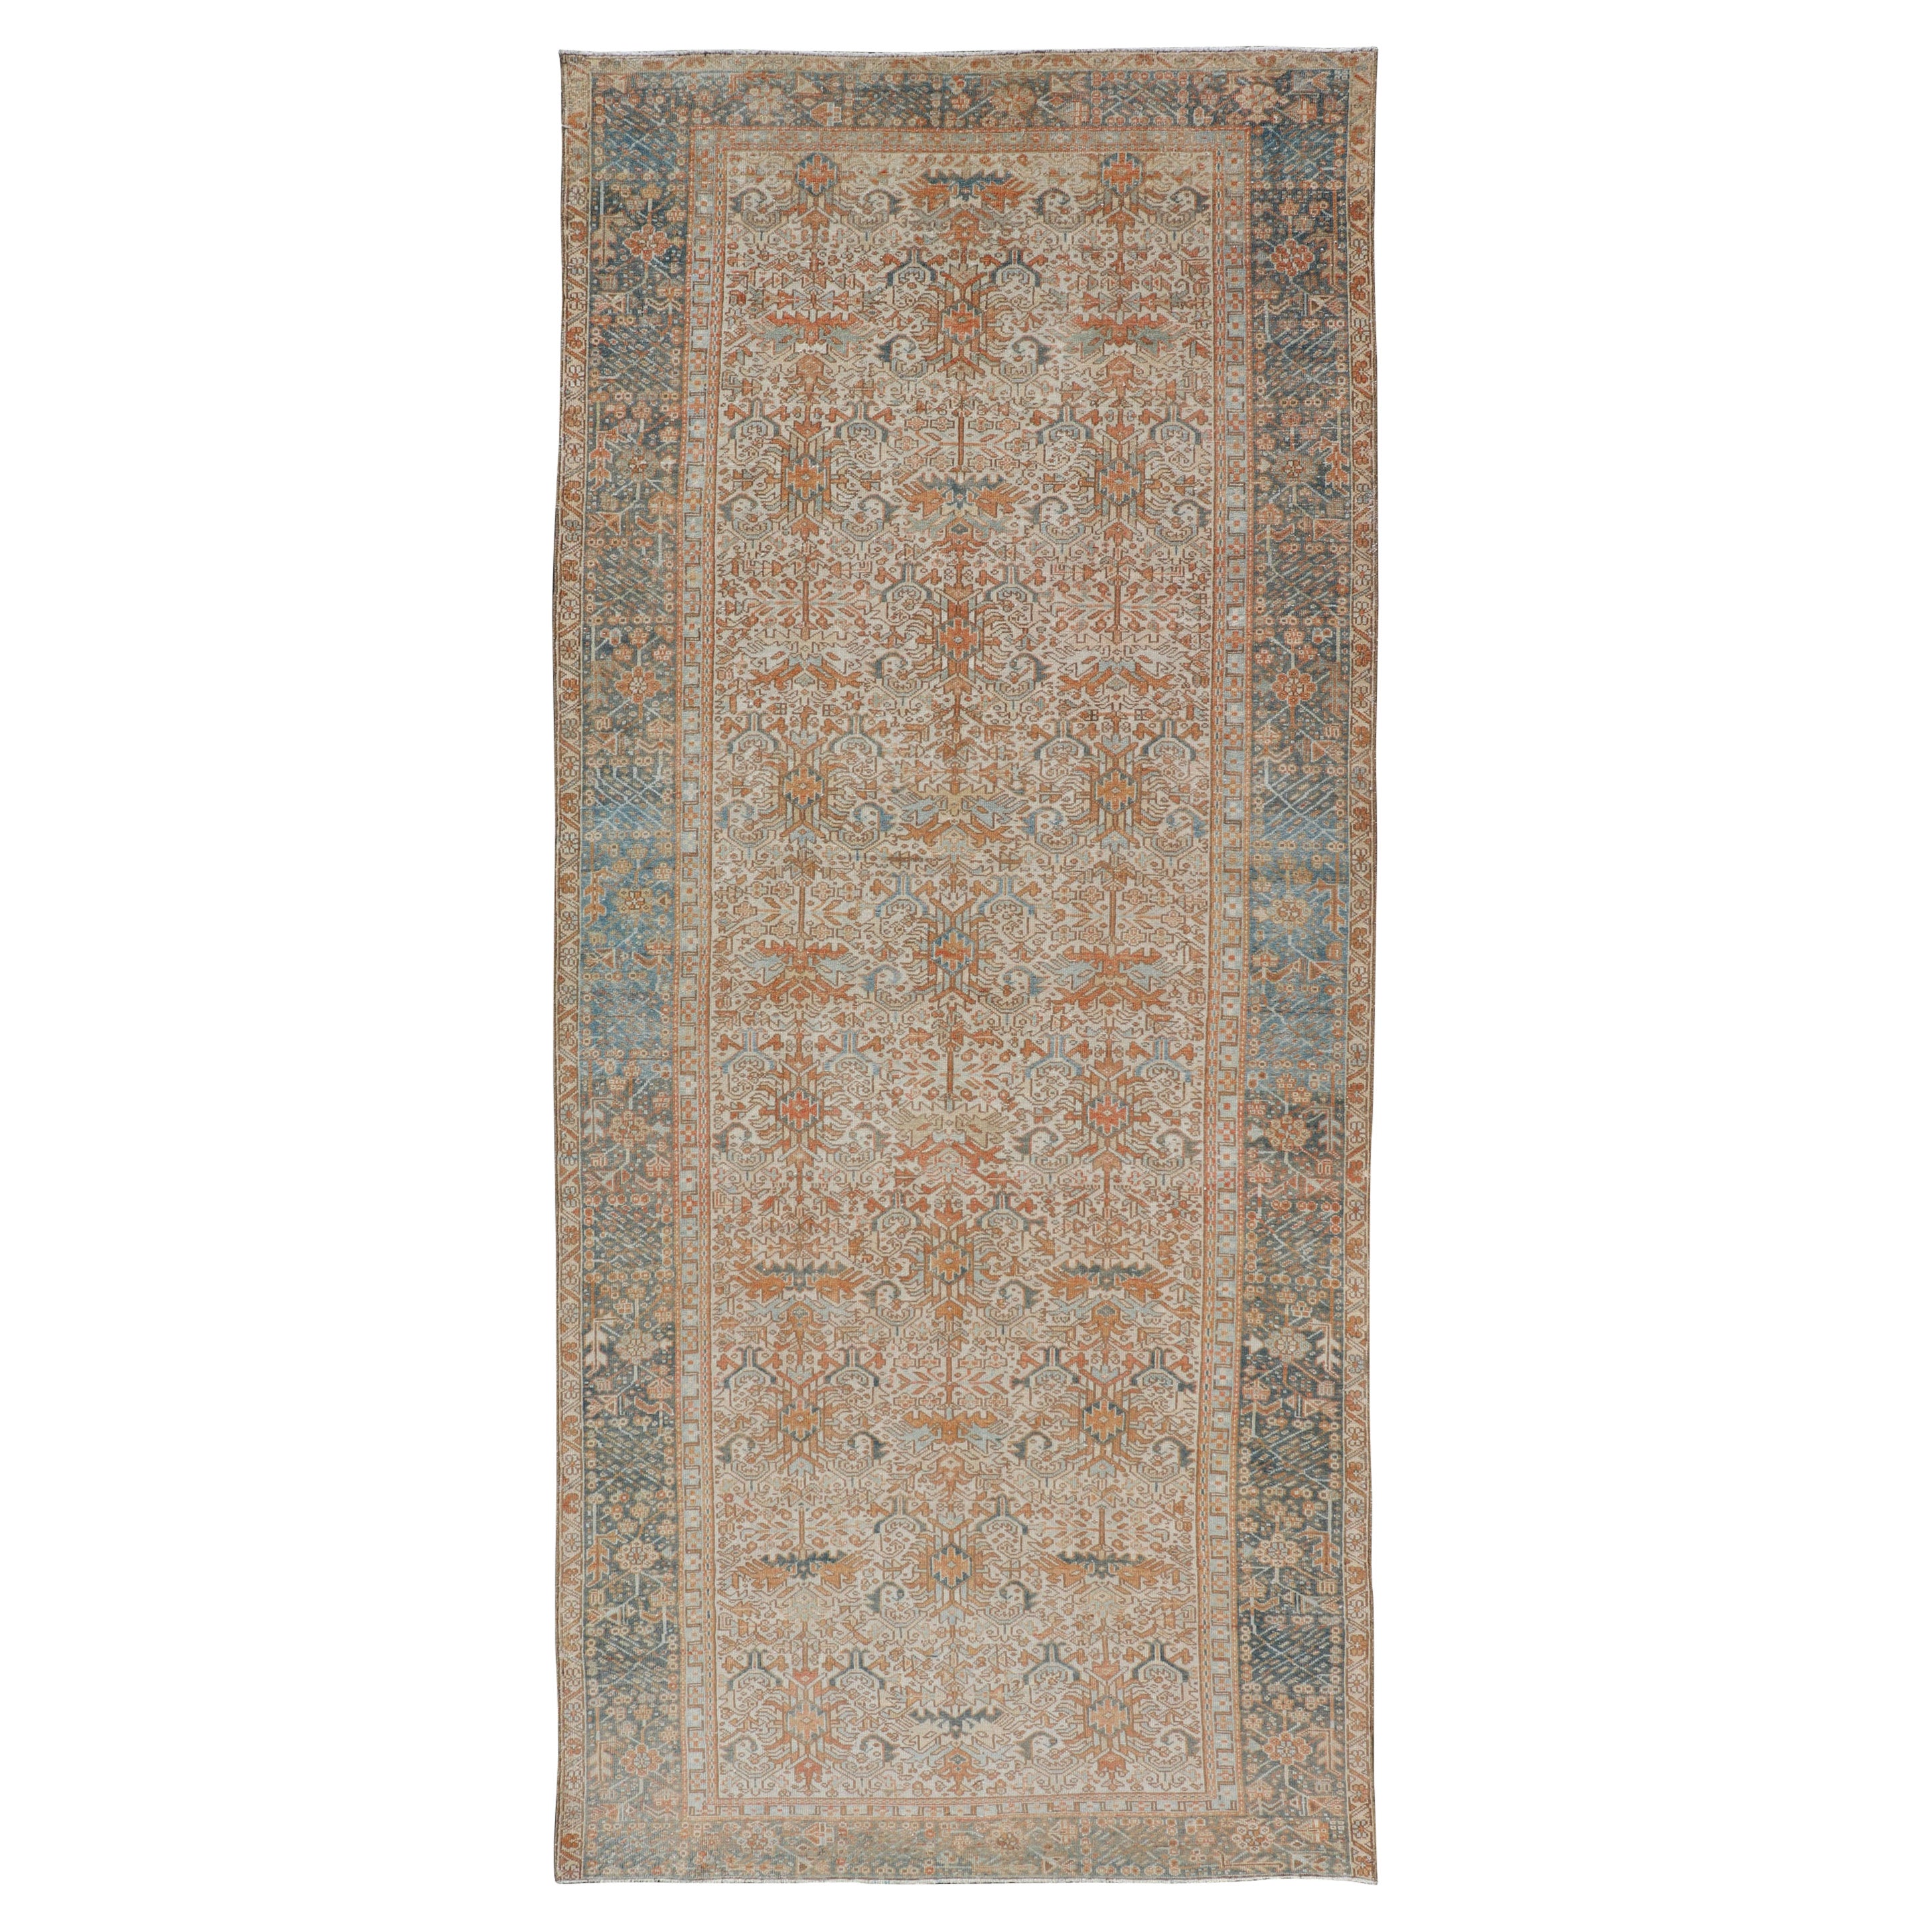 Antique Persian Gallery Heriz Rug with Geometric Design in Copper and Blue